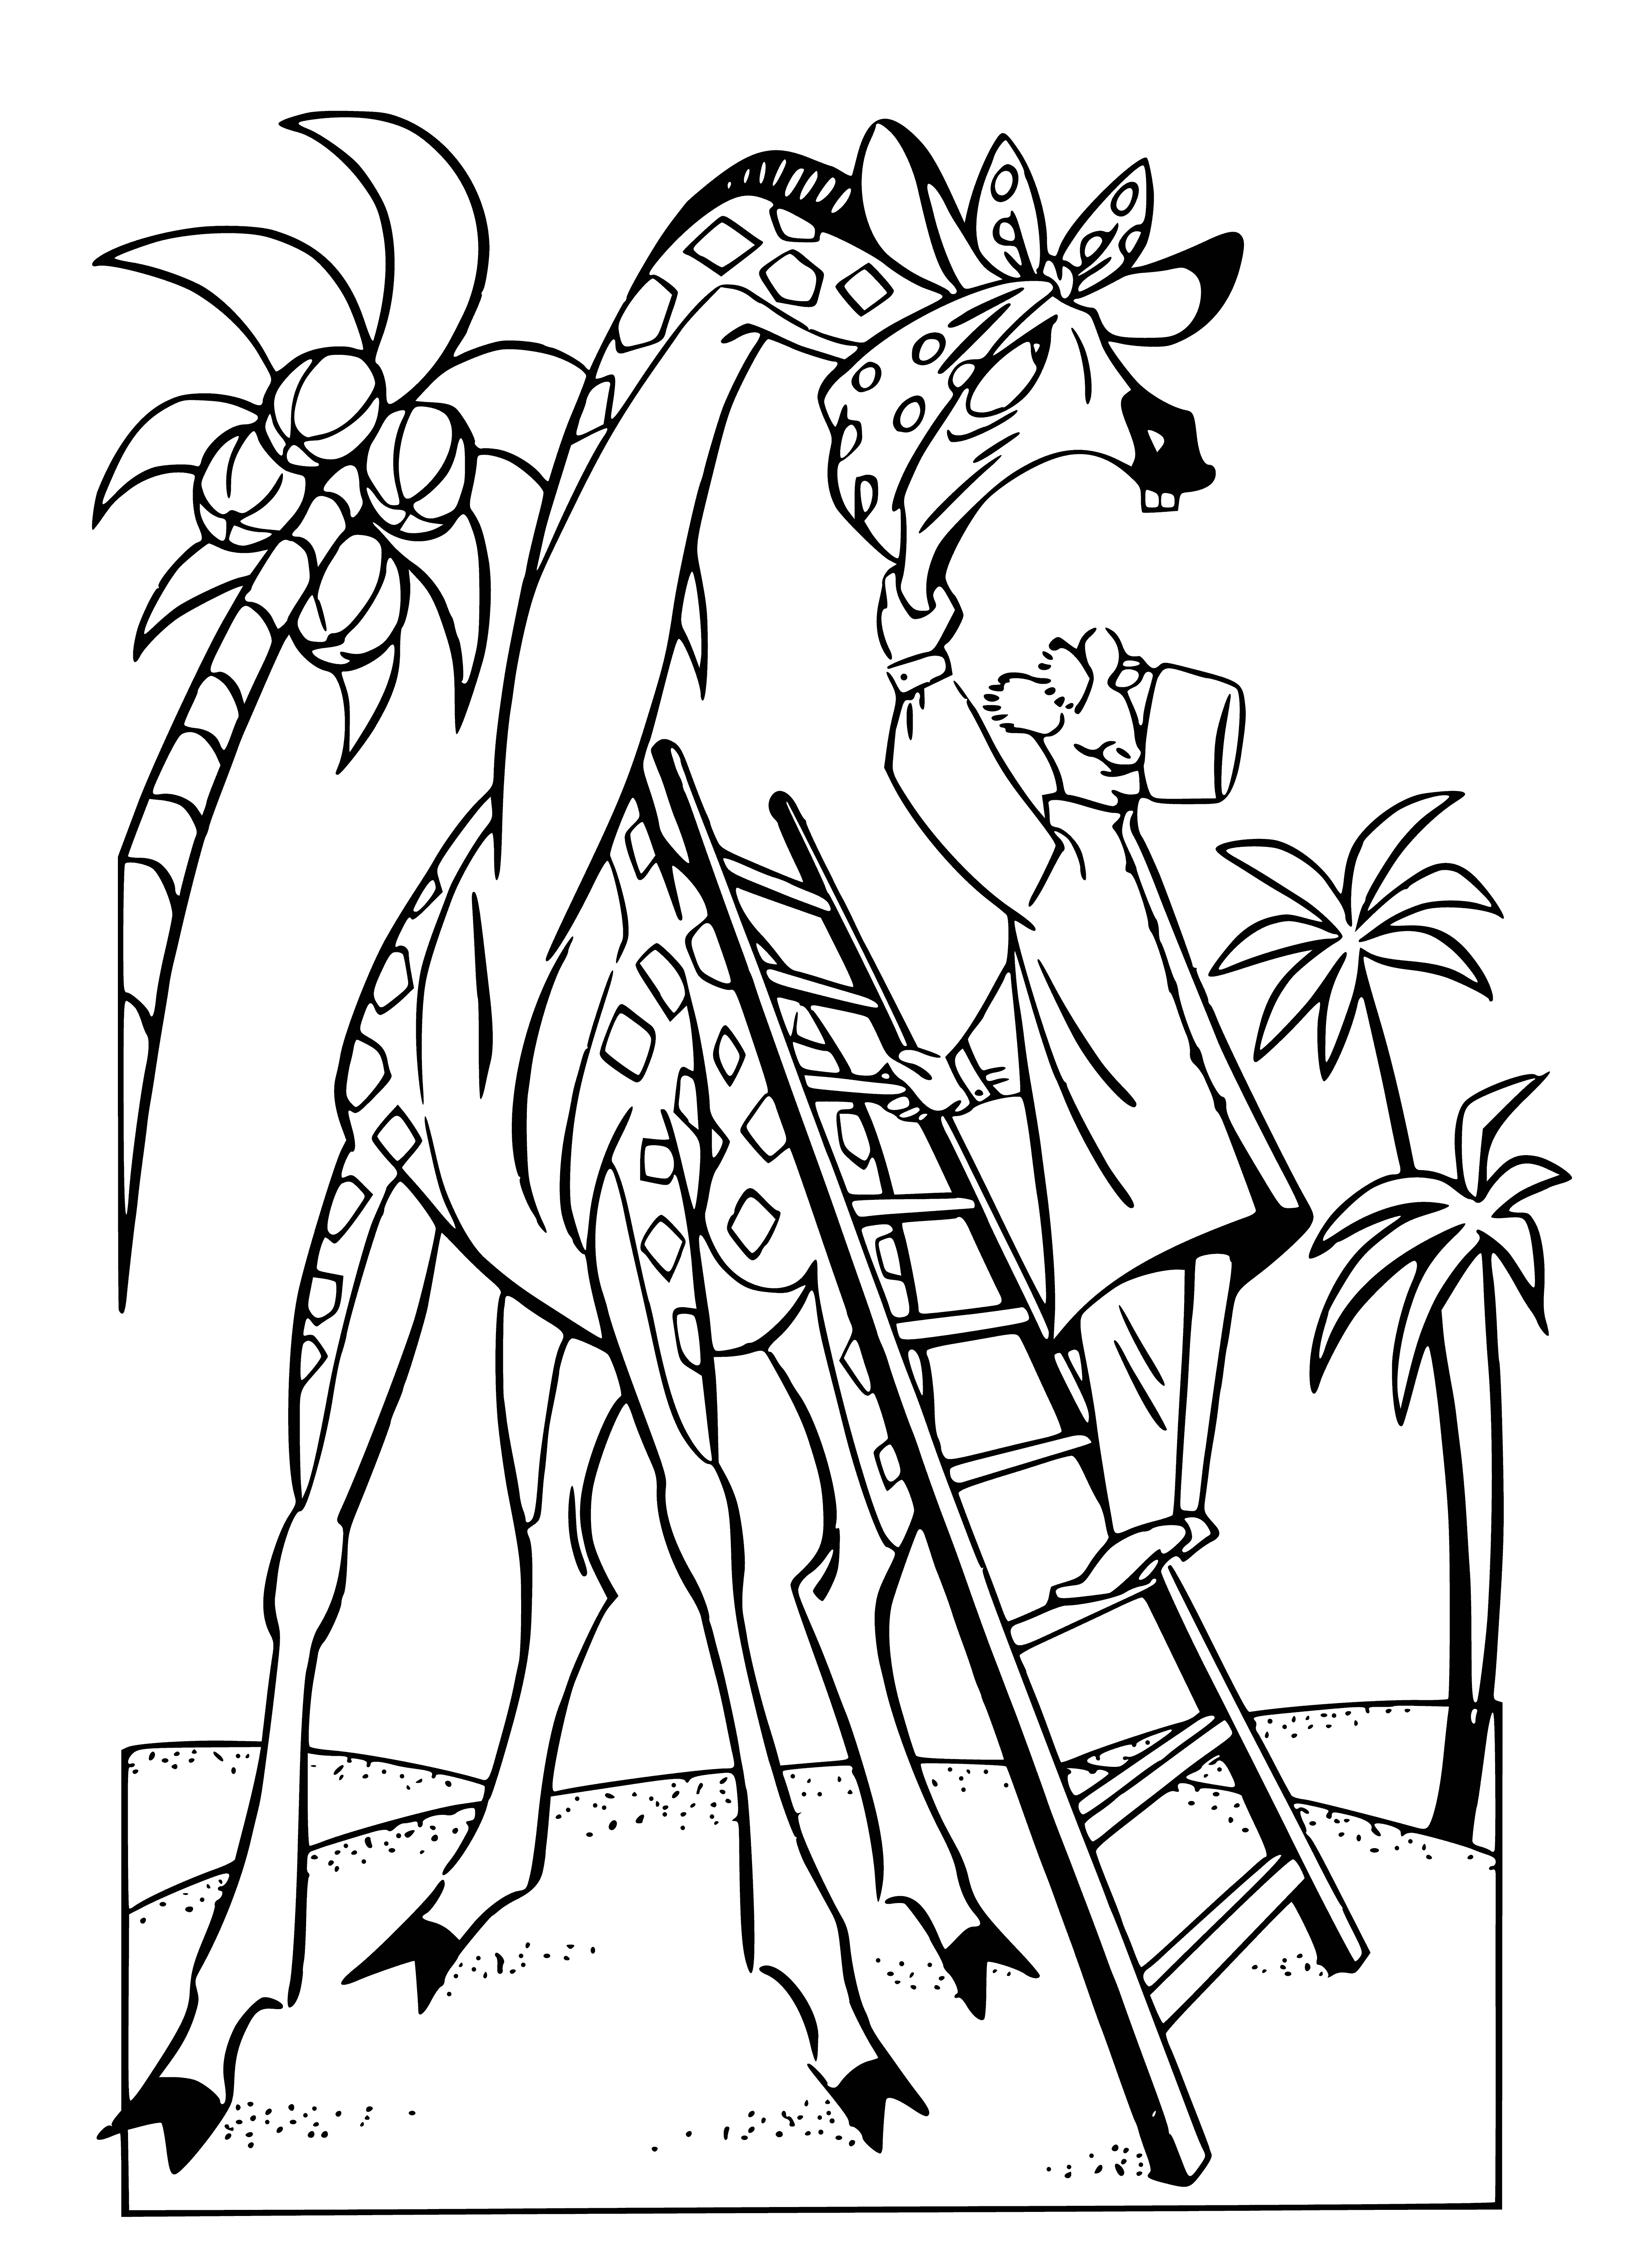 coloring page: A large yellow Giraffe is at the center of a coloring page. To its left is Aibolit, a small blue creature w/ big eyes, standing on a red ball. It has a brown neck, black head, white teeth, 2 small ears & 2 small eyes wearing a green collar & yellow bell.